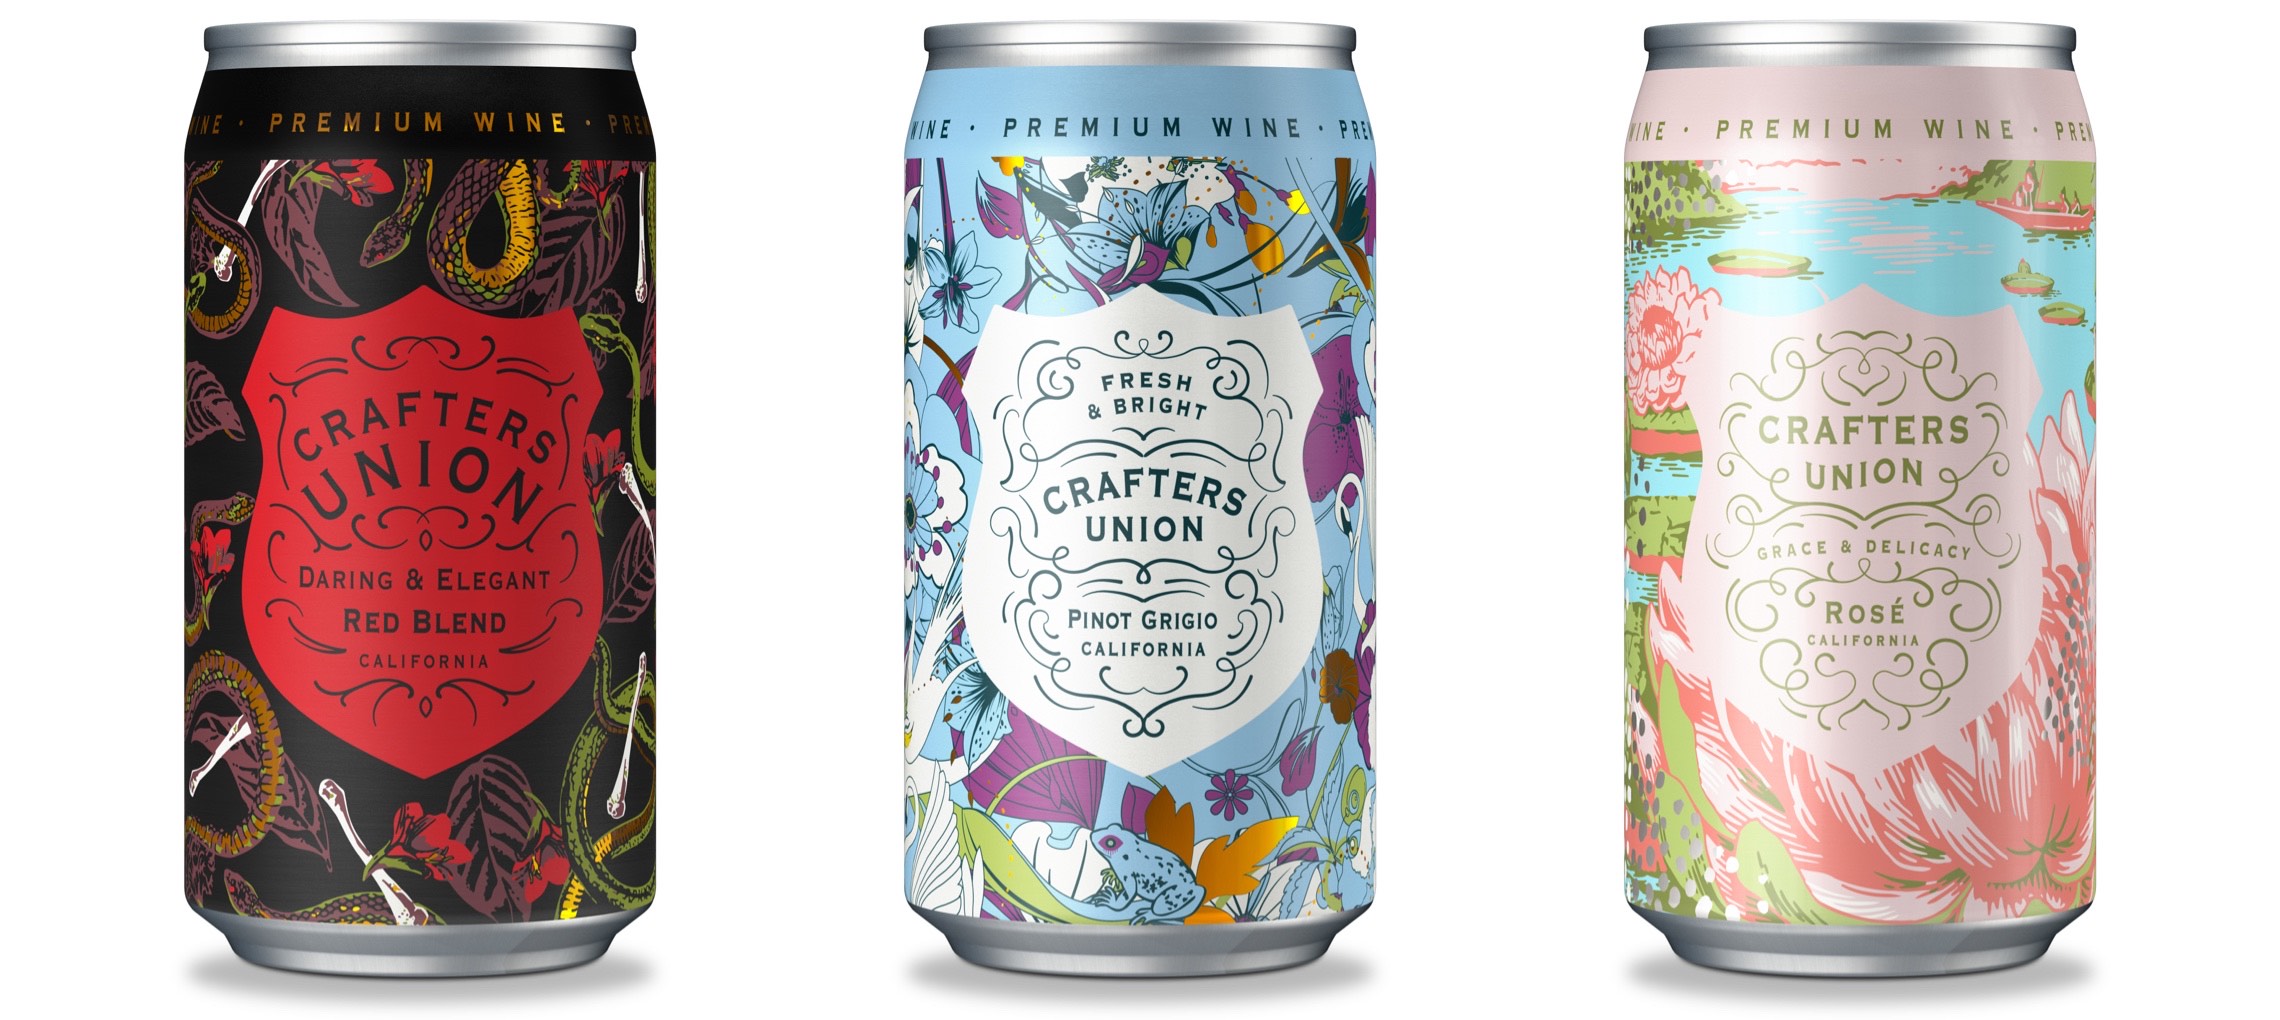 Photograph of three different Crafters Union cans.